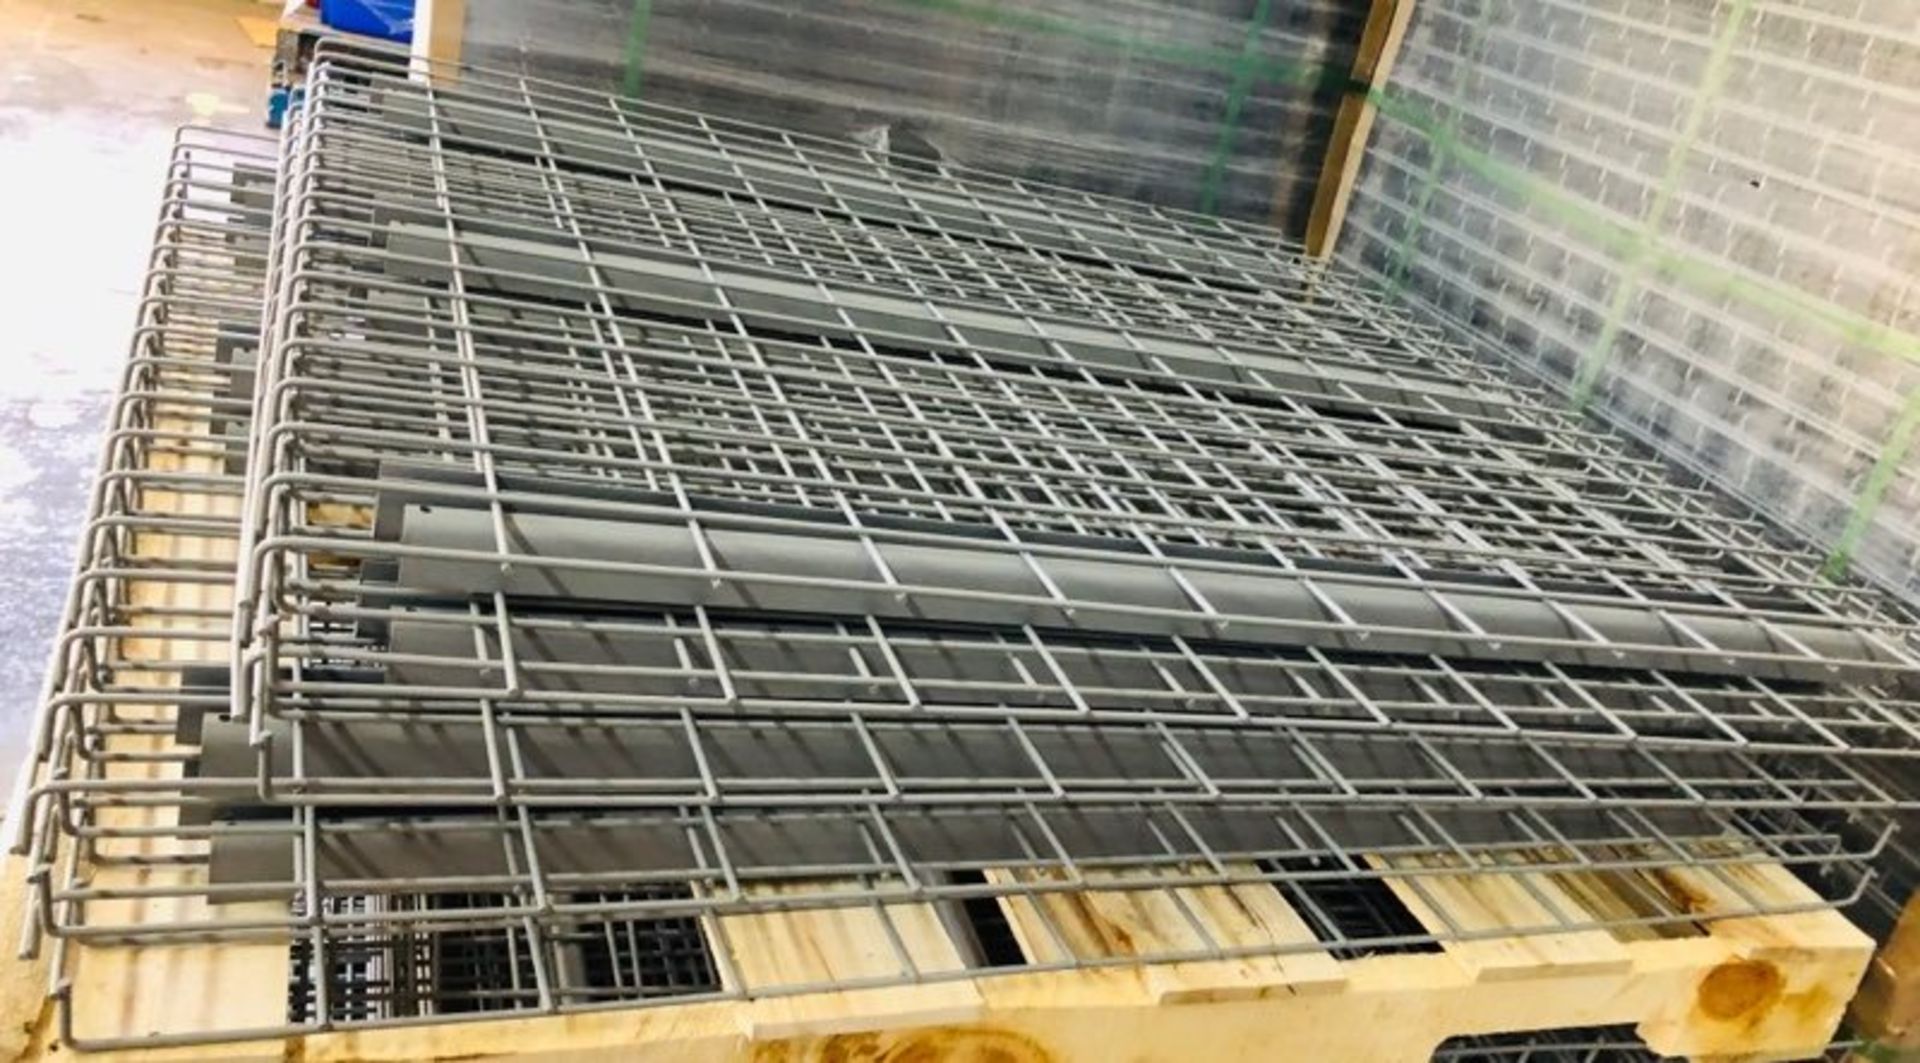 NEW 120 PCS OF STANDARD 48" X 46" WIREDECK - 1900 LBS CAPACITY - Image 2 of 2